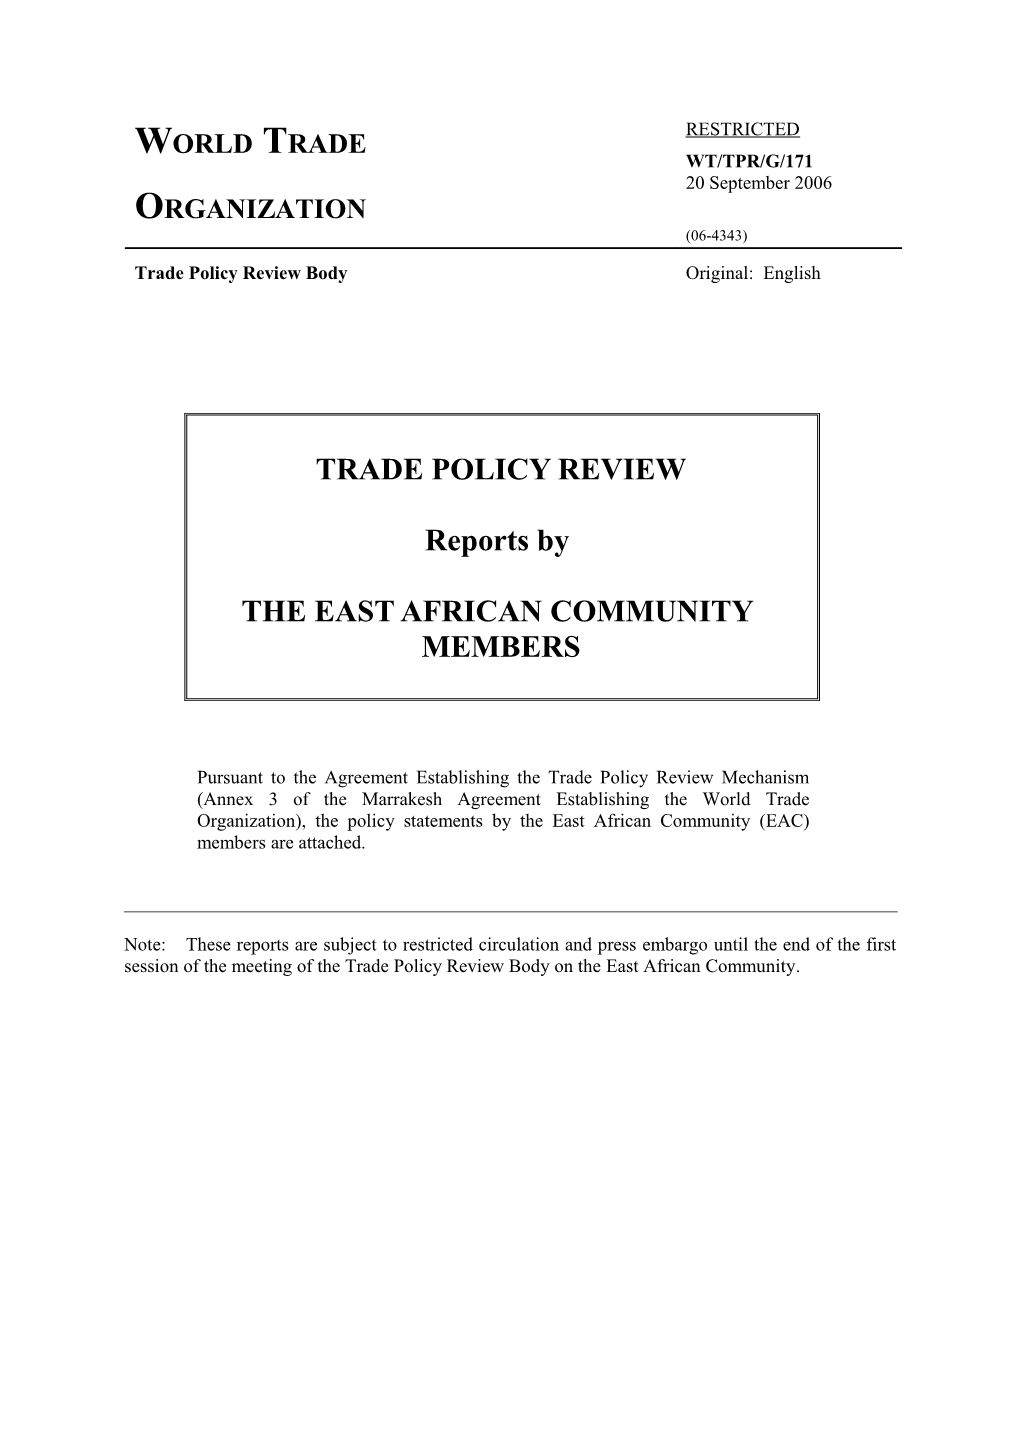 Trade Policy Review Body